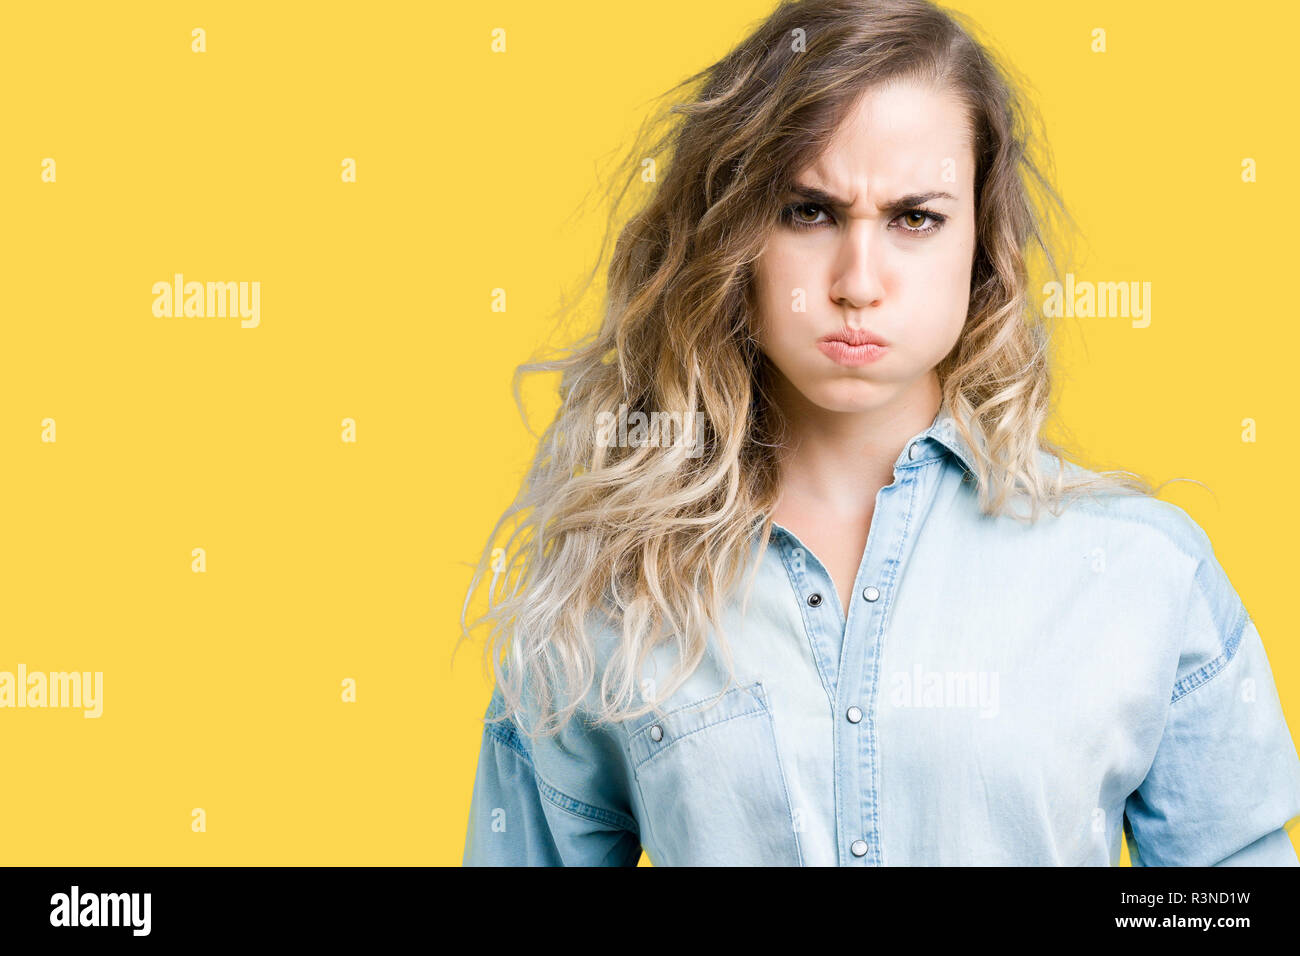 Beautiful young blonde woman over isolated background puffing cheeks with funny face. Mouth inflated with air, crazy expression. Stock Photo